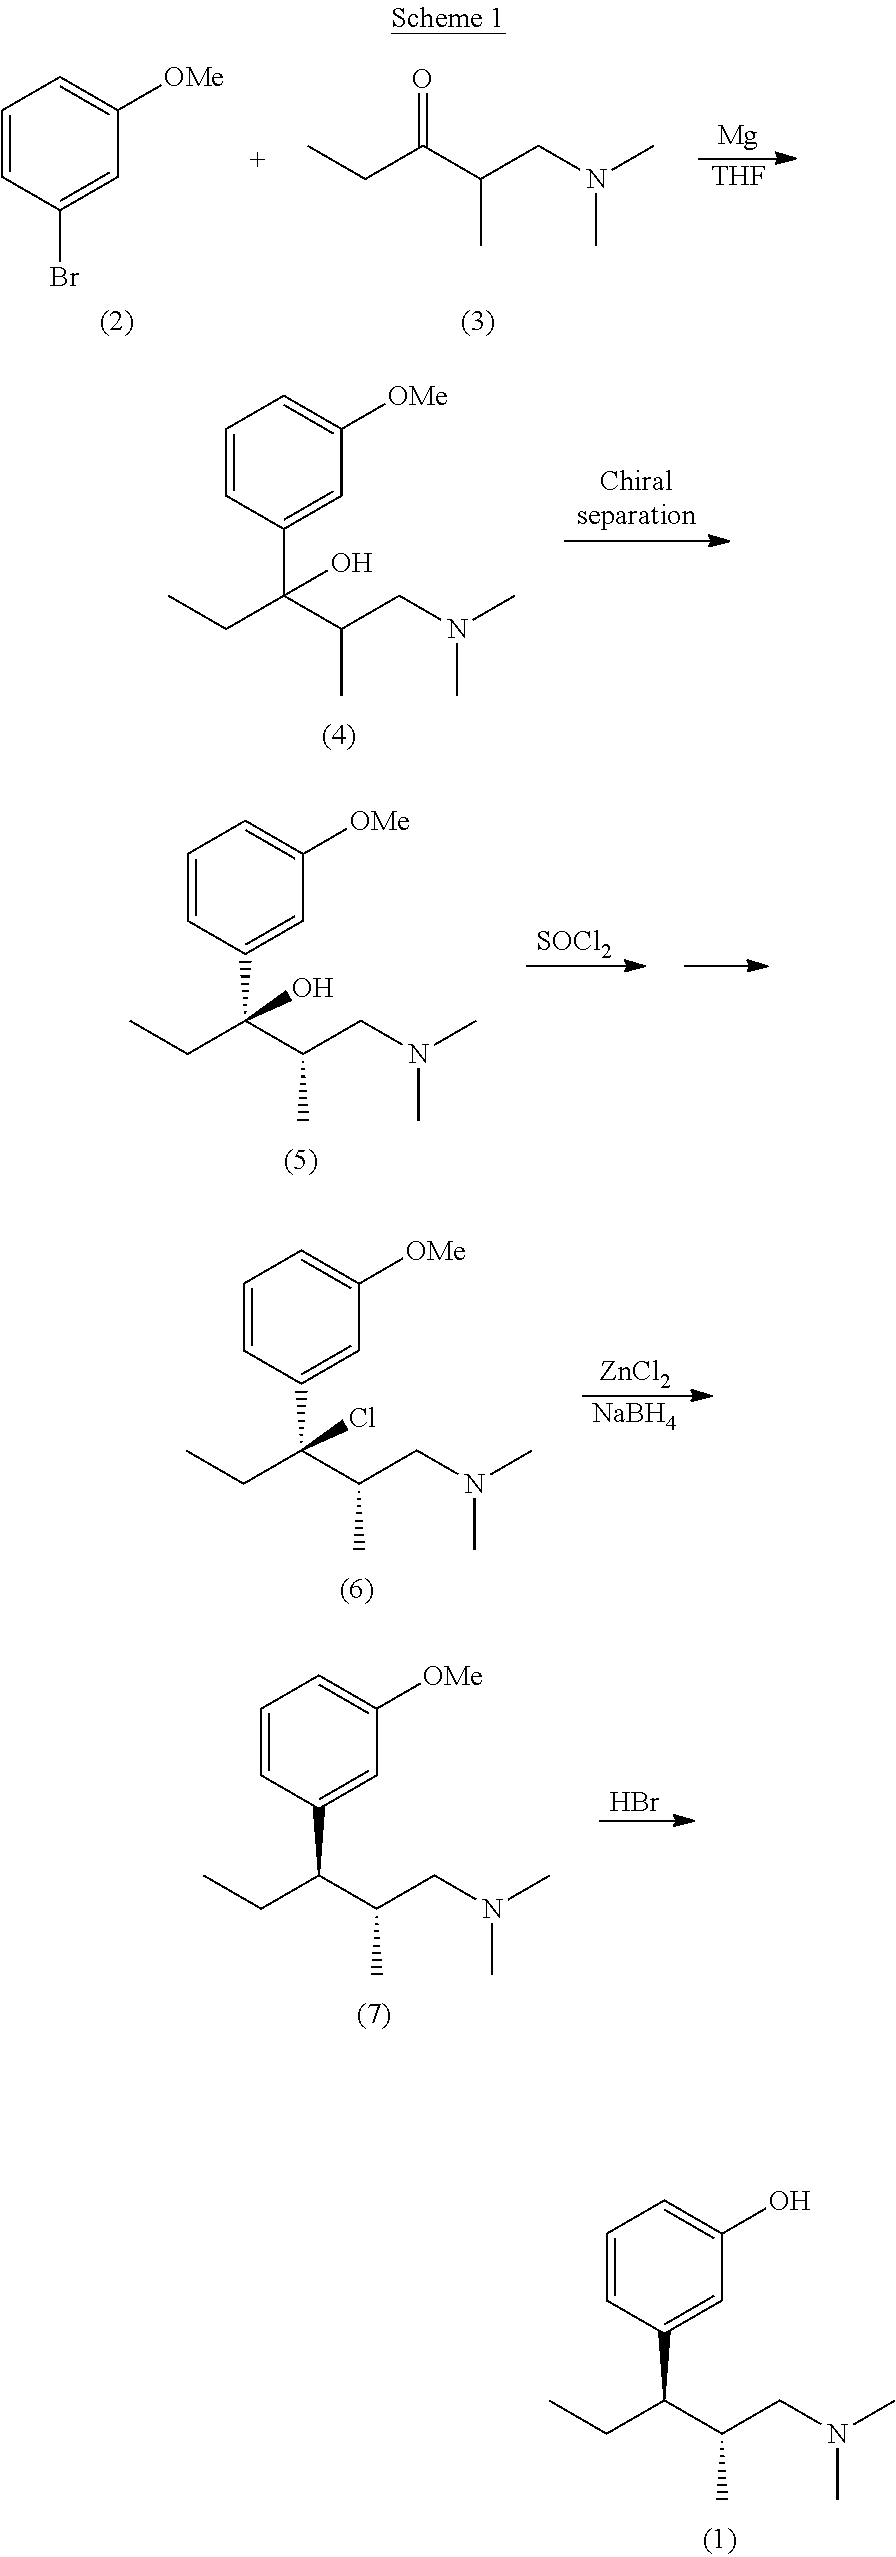 Intermediate compounds and processes for the preparation of tapentadol and related compounds